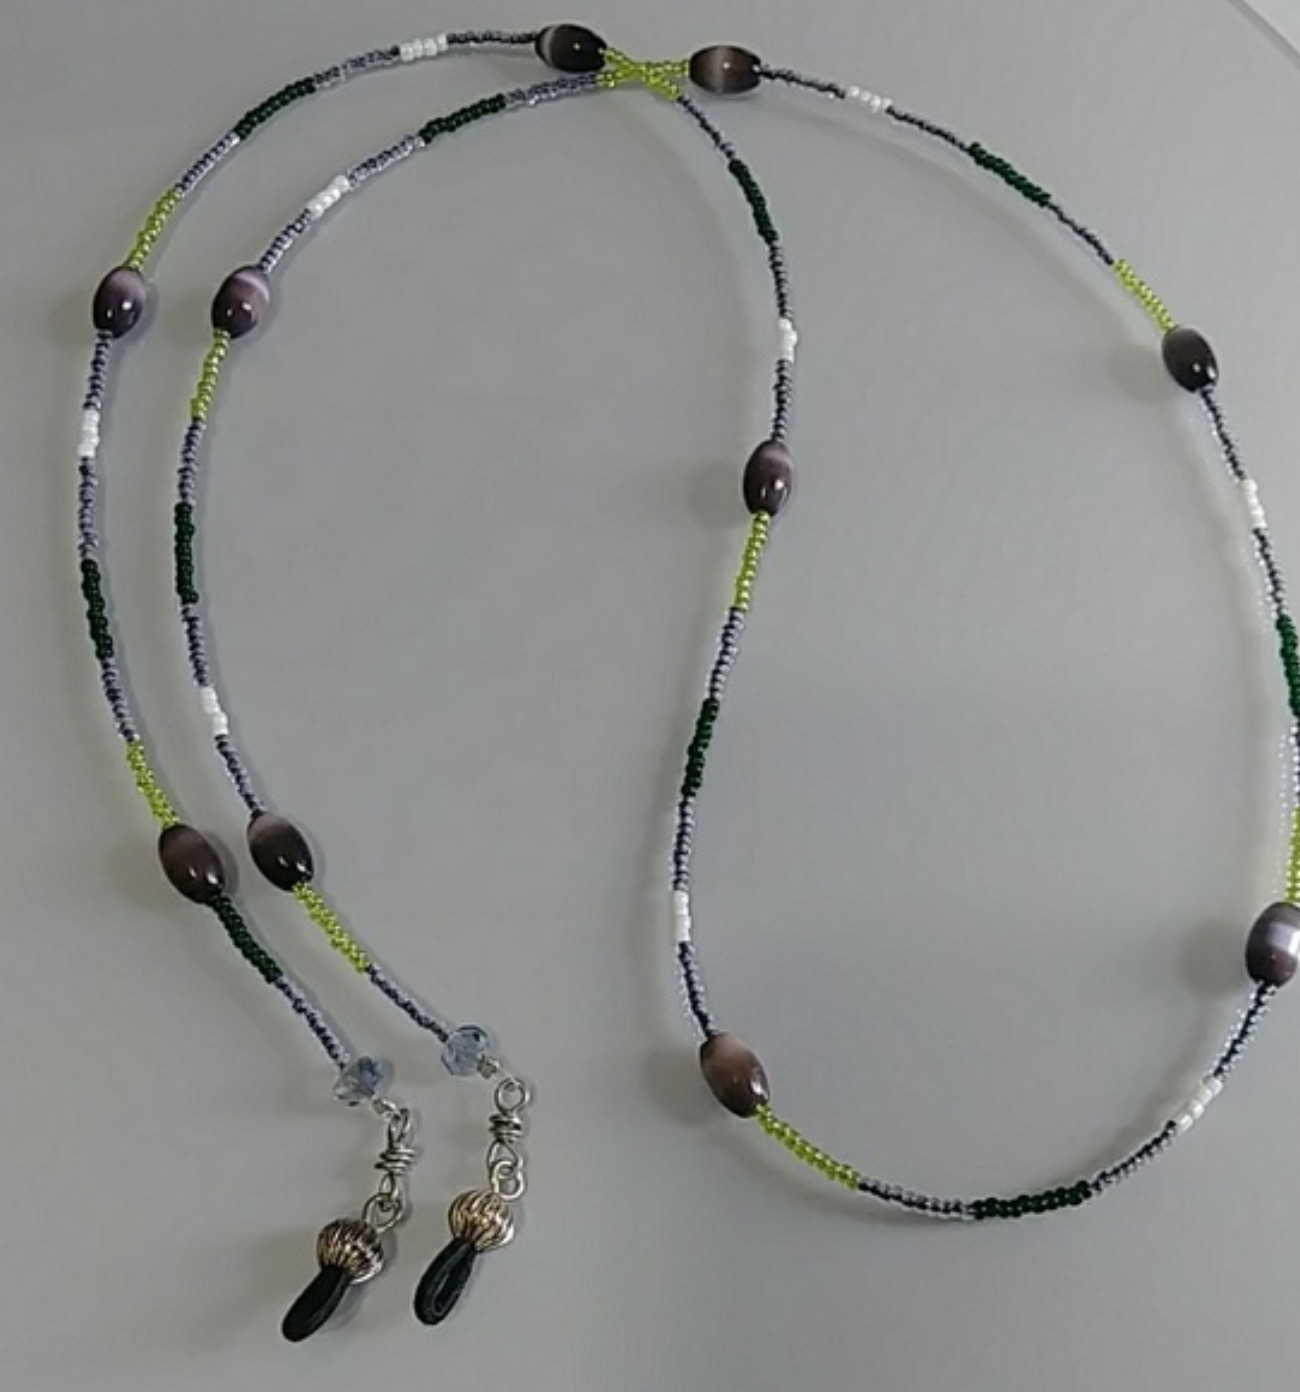 (701-EGC) - Description:  Seed Beads, Faceted Glass Bead, Silver Plated Eyeglass Holder. Dimension: 32' L (Inches)